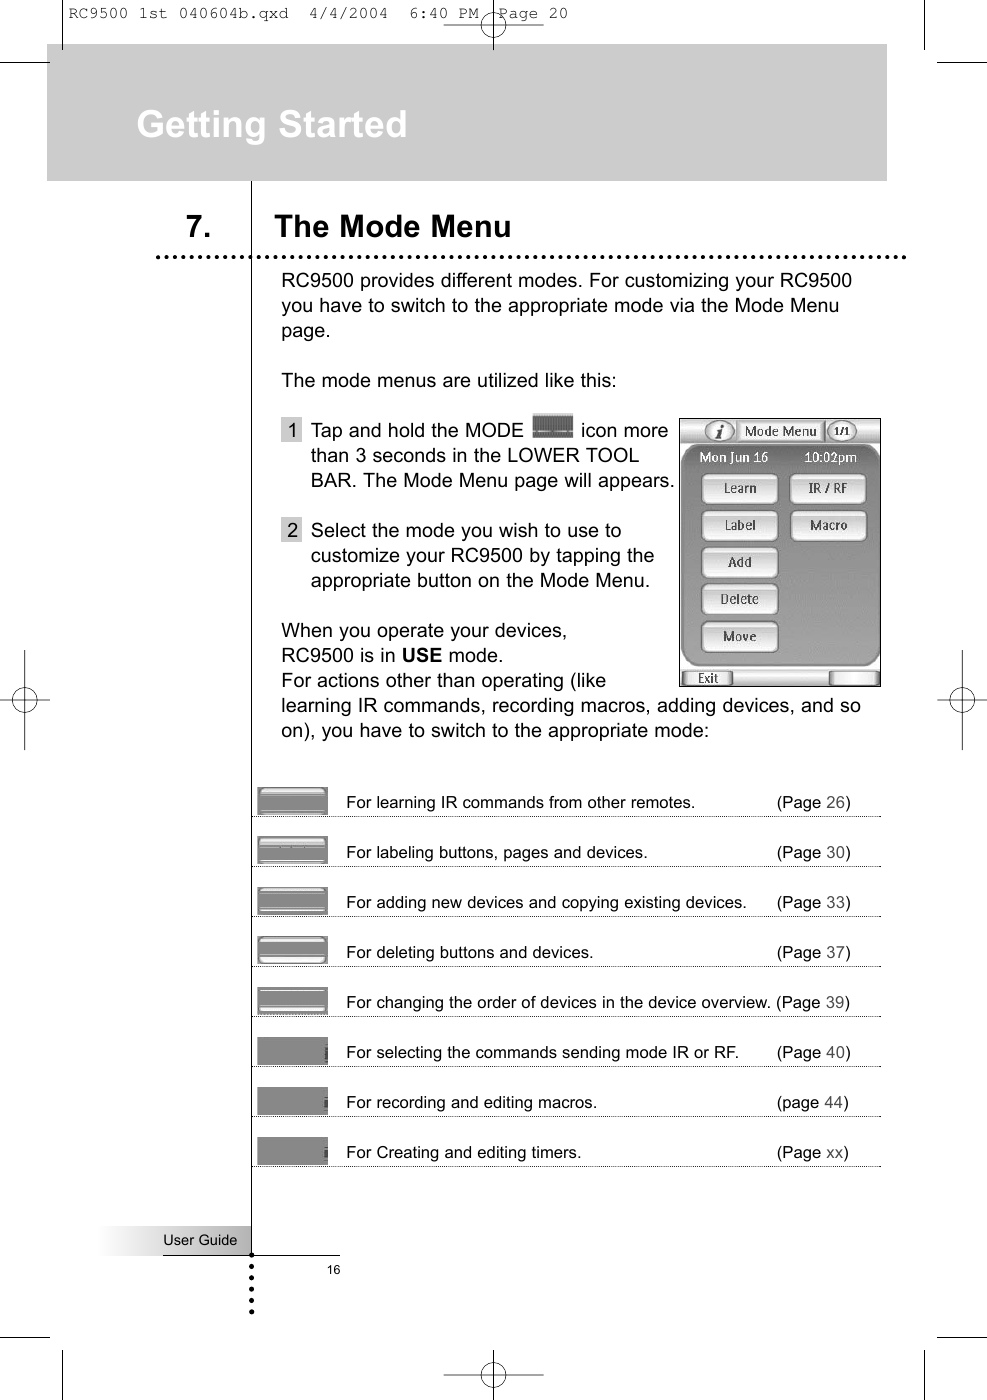 User Guide16RC9500 provides different modes. For customizing your RC9500you have to switch to the appropriate mode via the Mode Menupage. The mode menus are utilized like this:1  Tap and hold the MODE  icon more than 3 seconds in the LOWER TOOL BAR. The Mode Menu page will appears.2 Select the mode you wish to use to customize your RC9500 by tapping the appropriate button on the Mode Menu.When you operate your devices,  theRC9500 is in USE mode. For actions other than operating (like learning IR commands, recording macros, adding devices, and soon), you have to switch to the appropriate mode:For learning IR commands from other remotes. (Page 26)For labeling buttons, pages and devices. (Page 30)For adding new devices and copying existing devices. (Page 33)For deleting buttons and devices. (Page 37)For changing the order of devices in the device overview. (Page 39)For selecting the commands sending mode IR or RF. (Page 40)For recording and editing macros. (page 44)For Creating and editing timers. (Page xx)Getting Started7. The Mode MenuRC9500 1st 040604b.qxd  4/4/2004  6:40 PM  Page 20